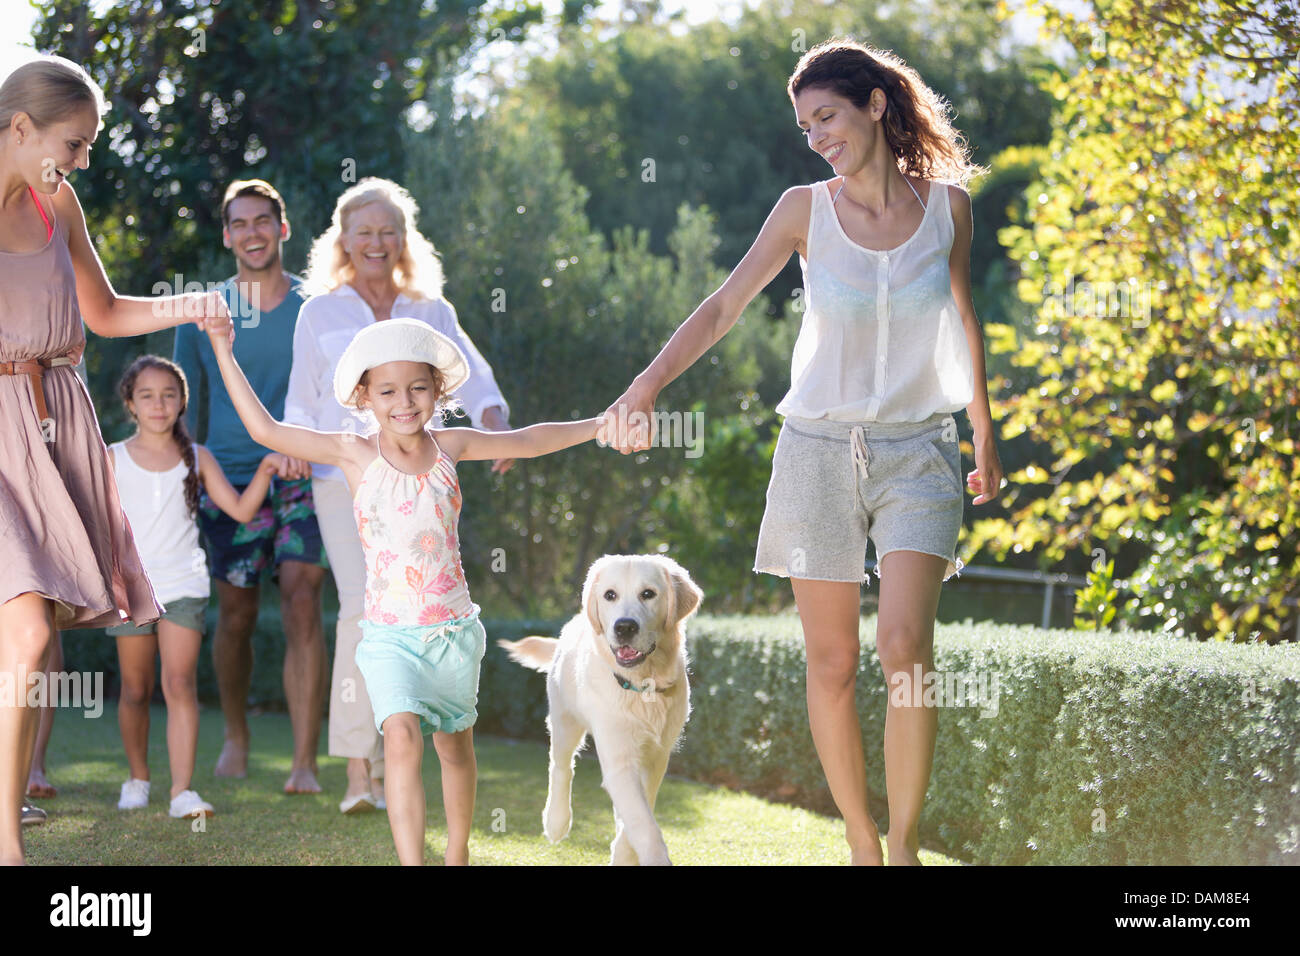 Family walking together in park Stock Photo